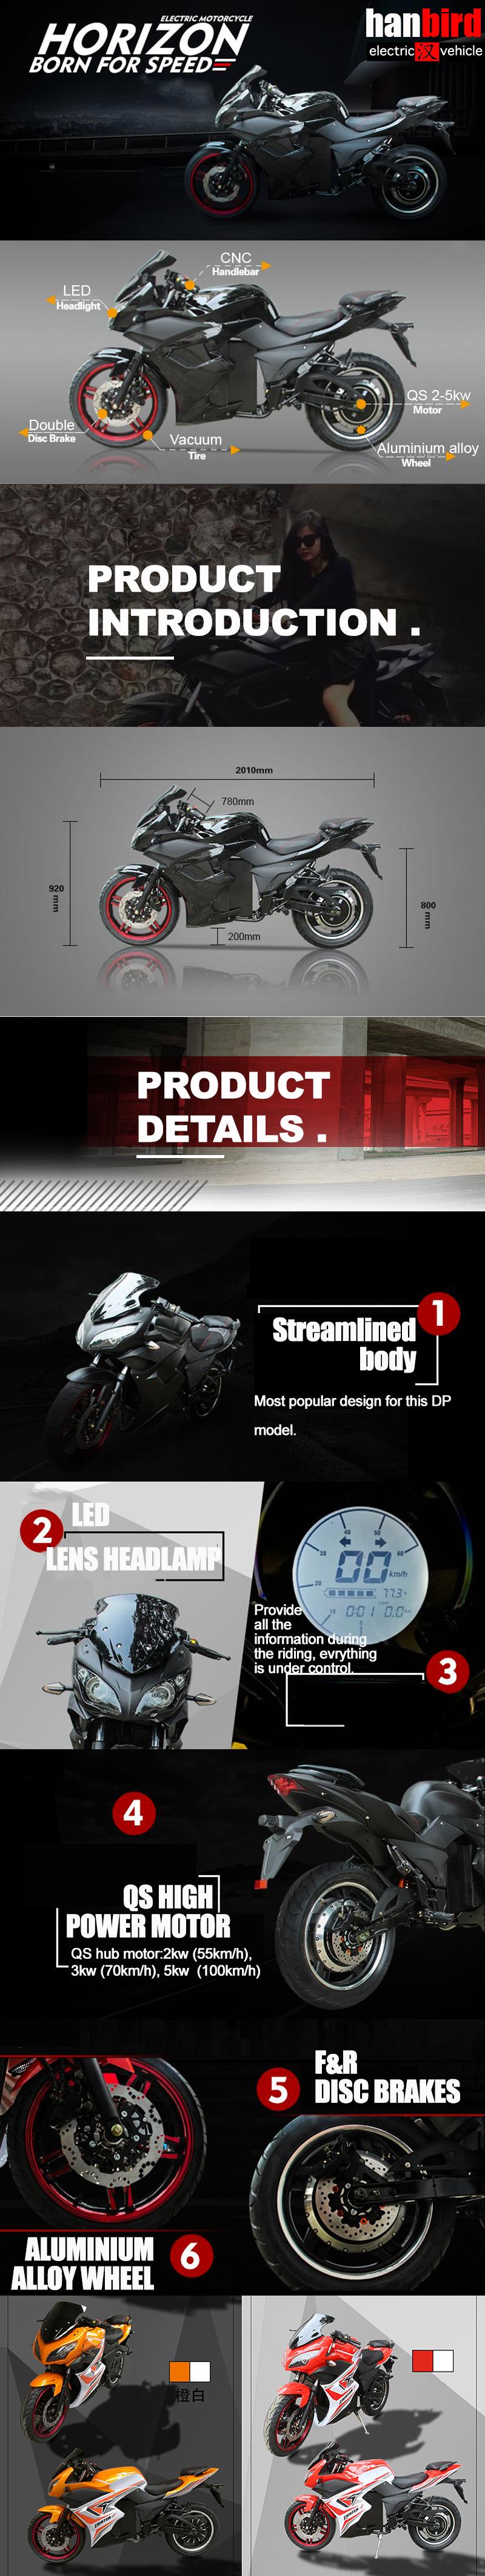 Wholesale high speed transmission hybrid motorcycle electric who makes motorcycles when will be affordable